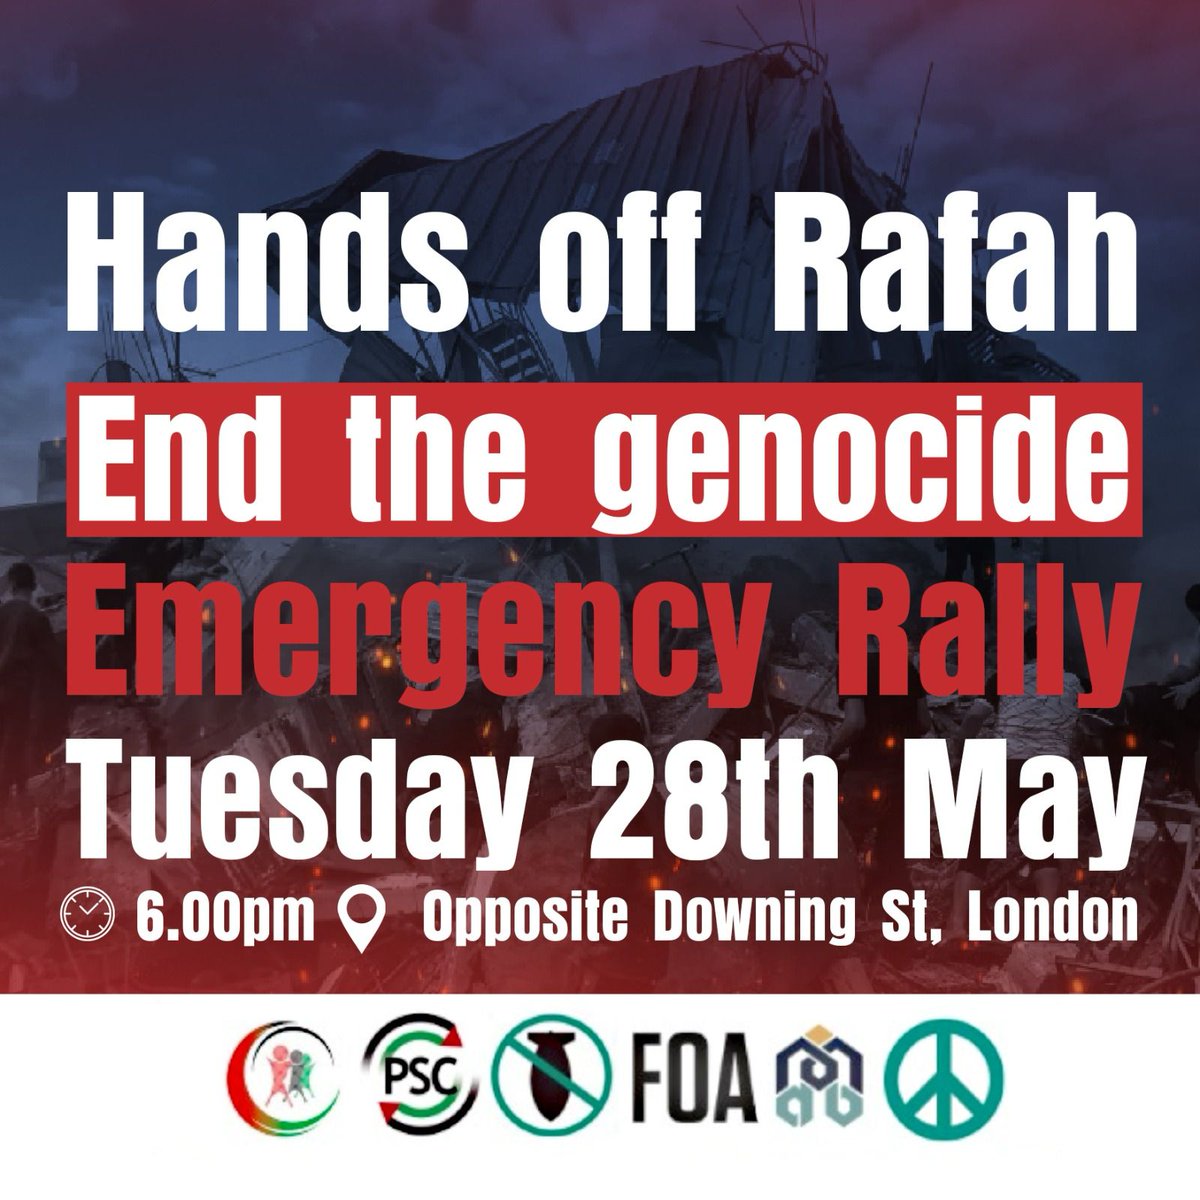 🚨EMERGENCY DEMO TODAY - HANDS OFF RAFAH 6pm outside Downing Street Israel's murderous attacks on Rafah, and Gaza as a whole, are crimes against humanity. The United States, Britain and other Western powers continue to arm Israel - enabling genocide. #StopGazaGenocide‌